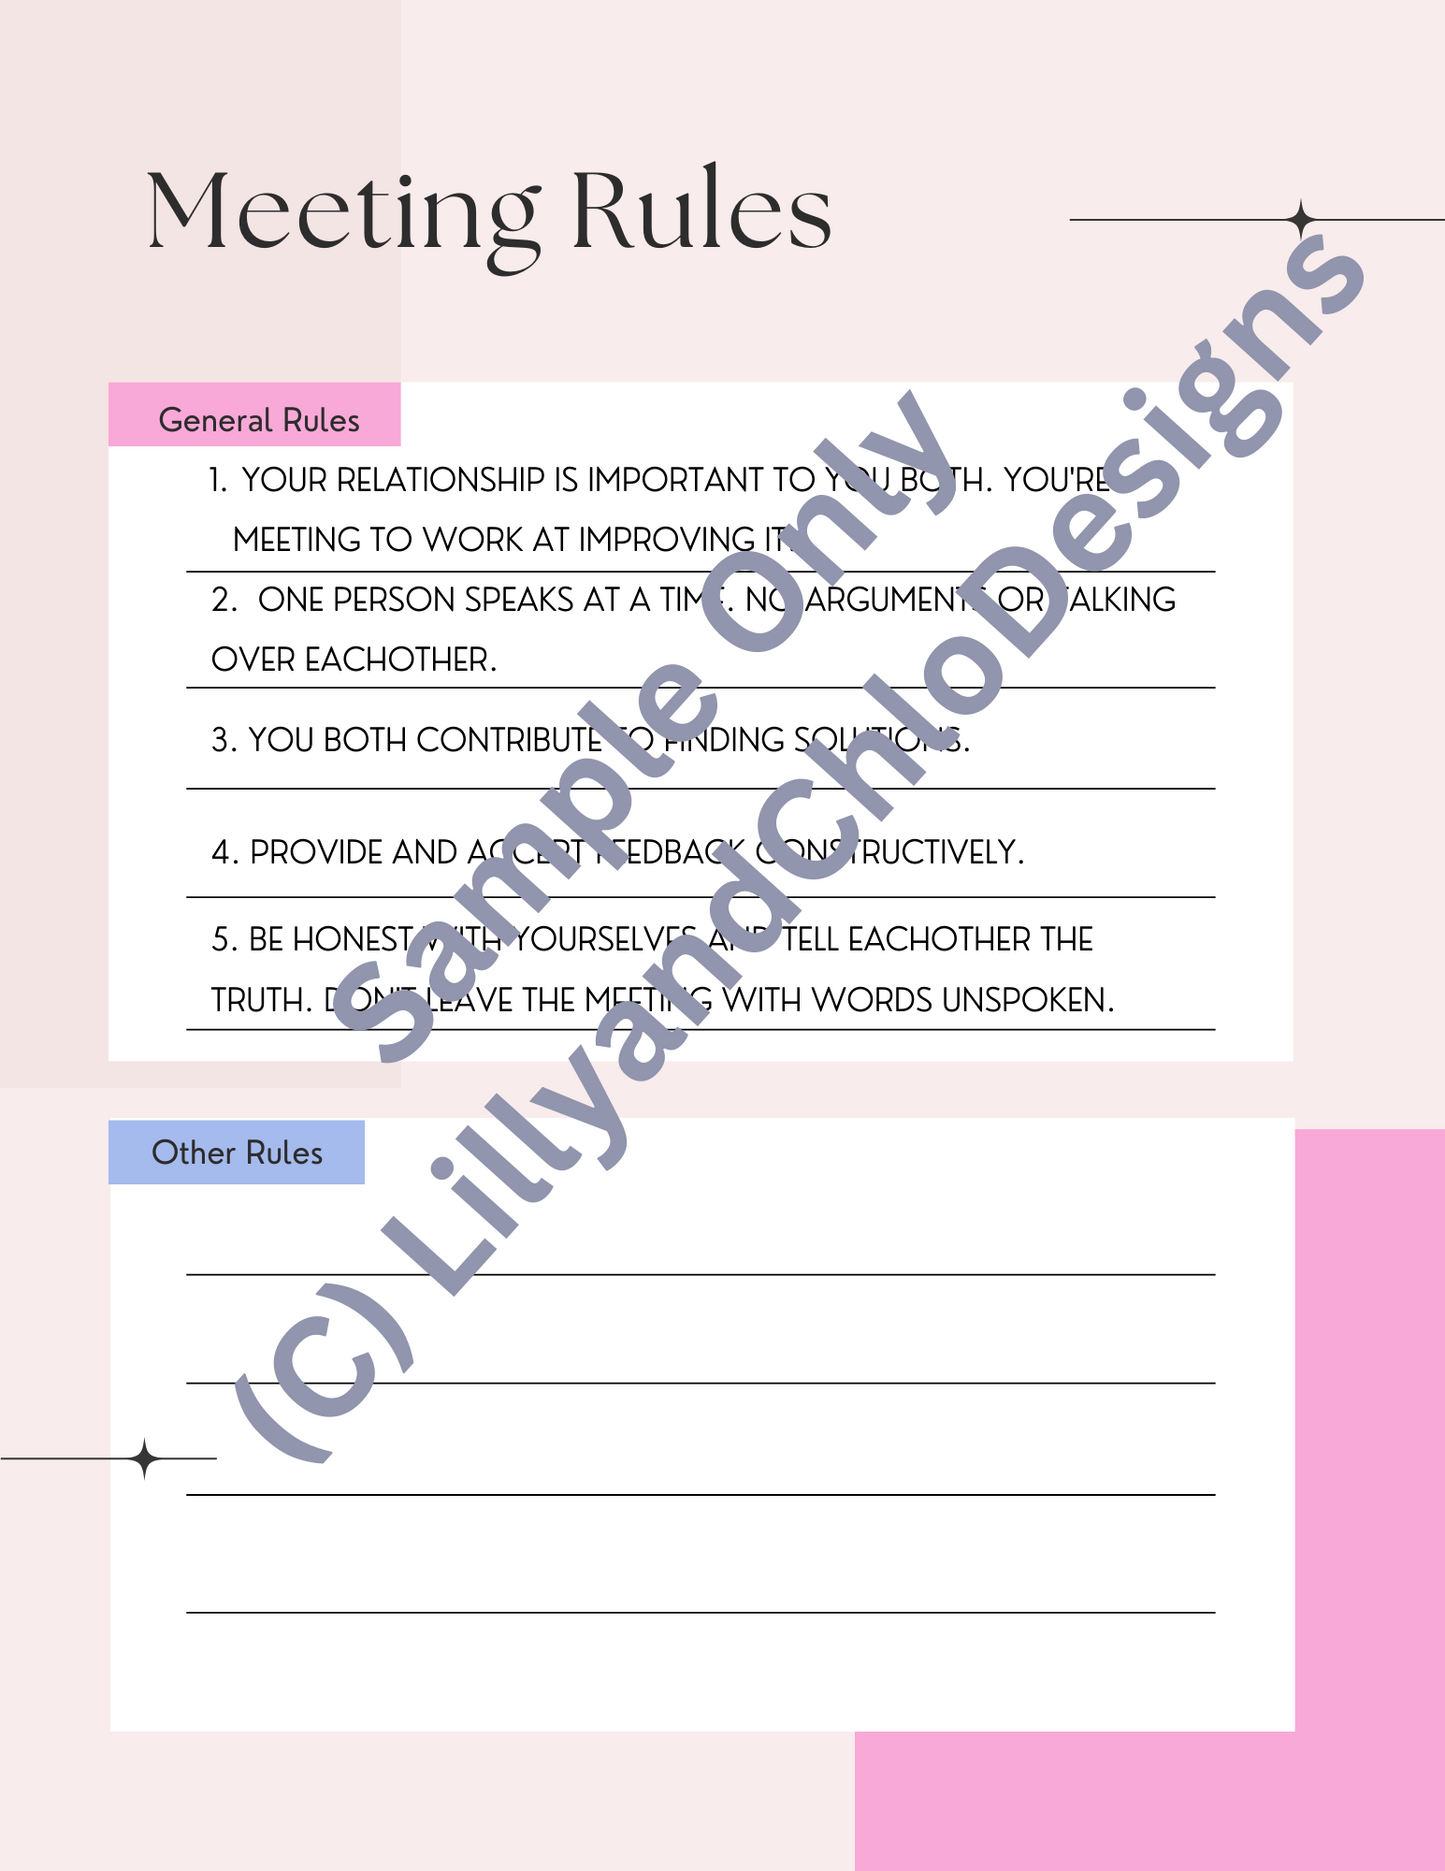 Couples Meeting Rules, Marriage Meeting Rules, Relationship Improvement Meeting. General and Other Rules. Editable printable pdf.